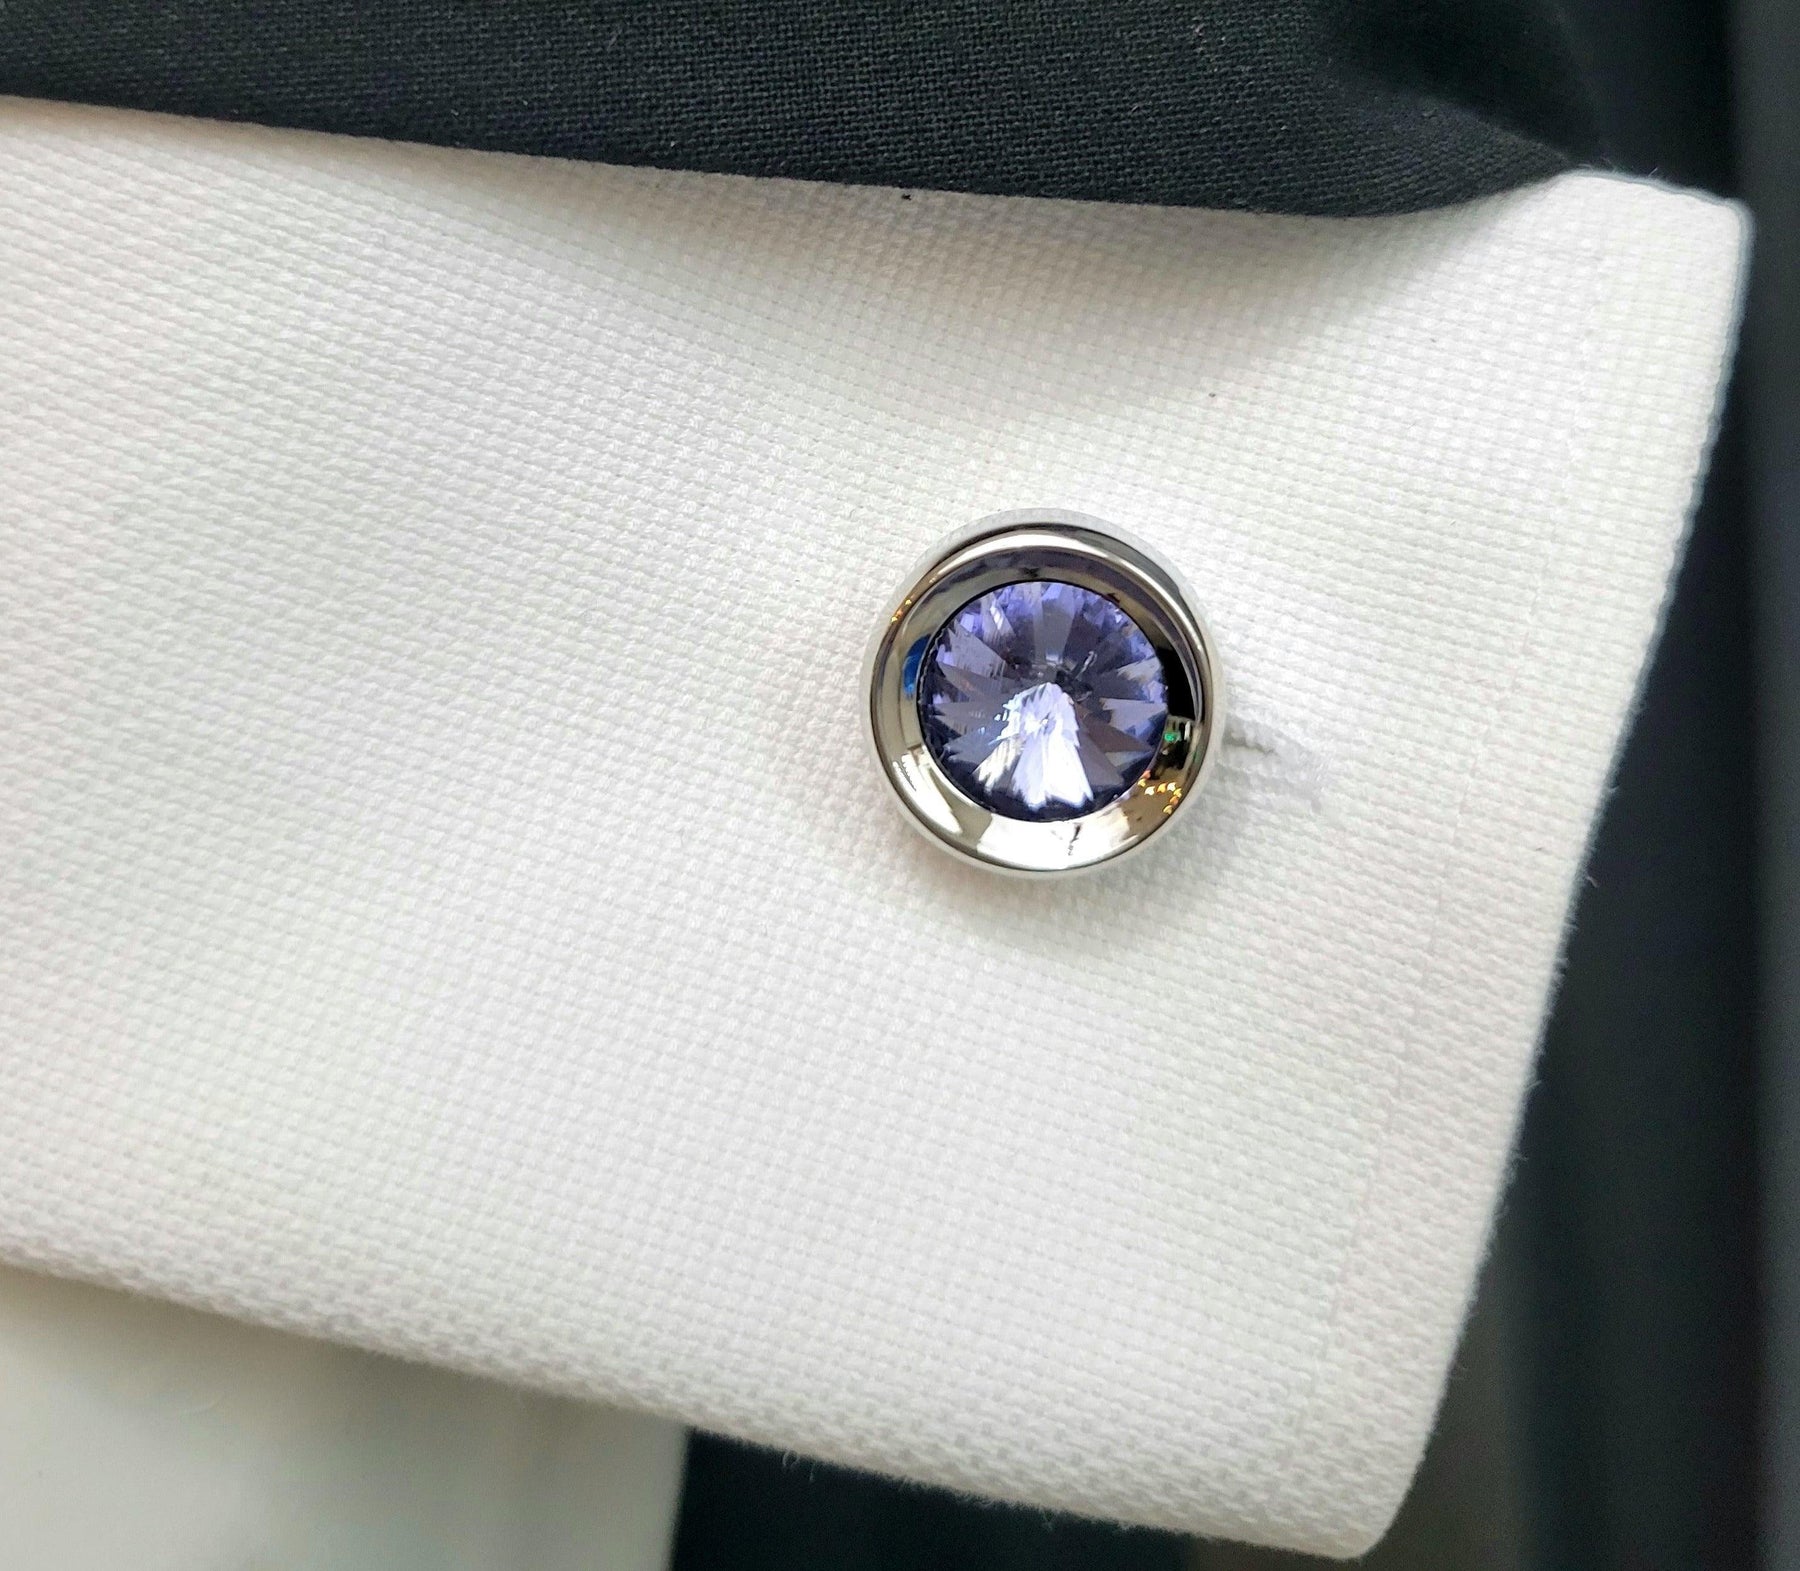 Silver Cufflinks with Violet Gems - The Upscale Banker